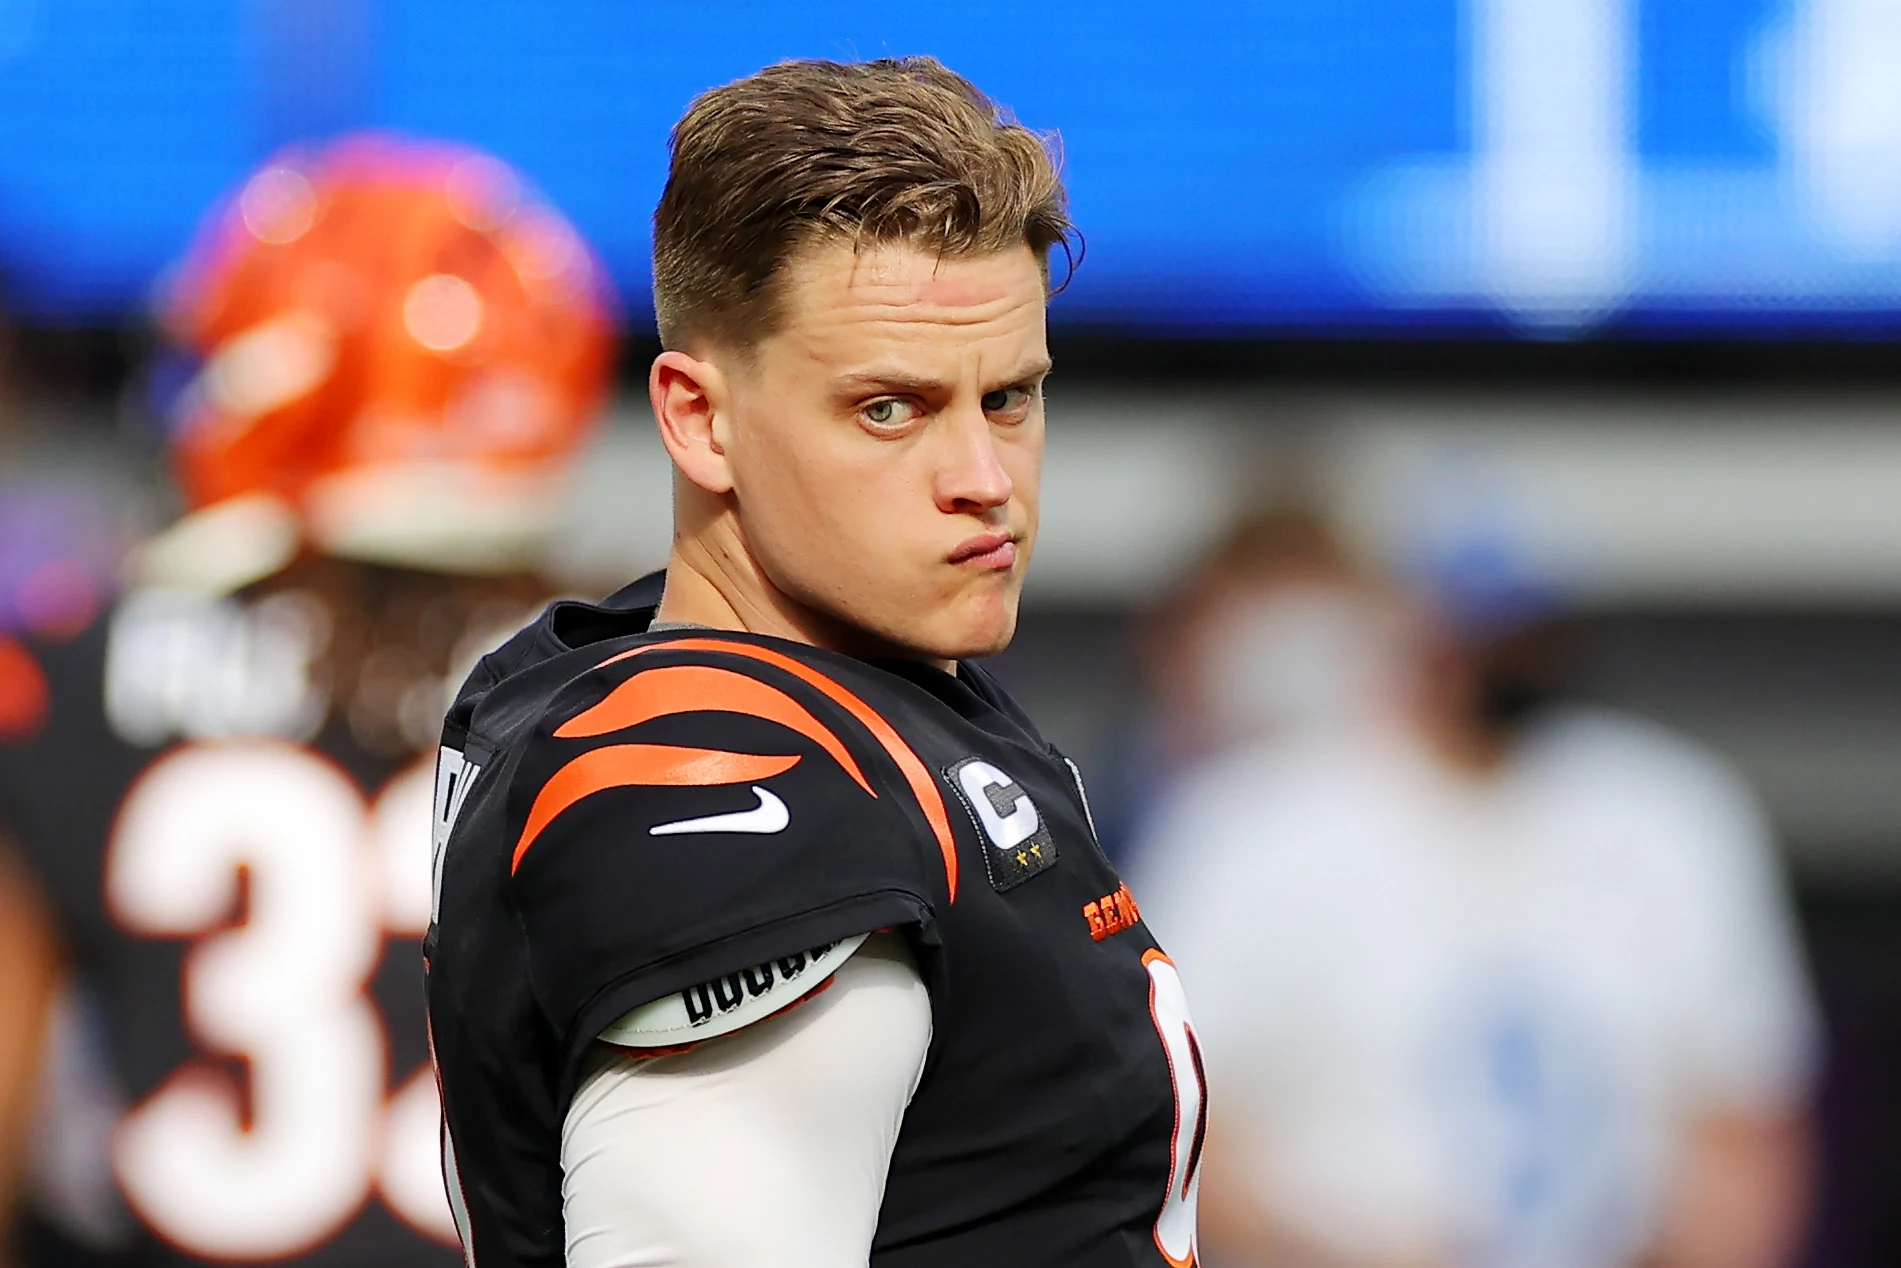 NFL's Newest Star Joe Burrow Isn't So “Cool” When It Comes To The